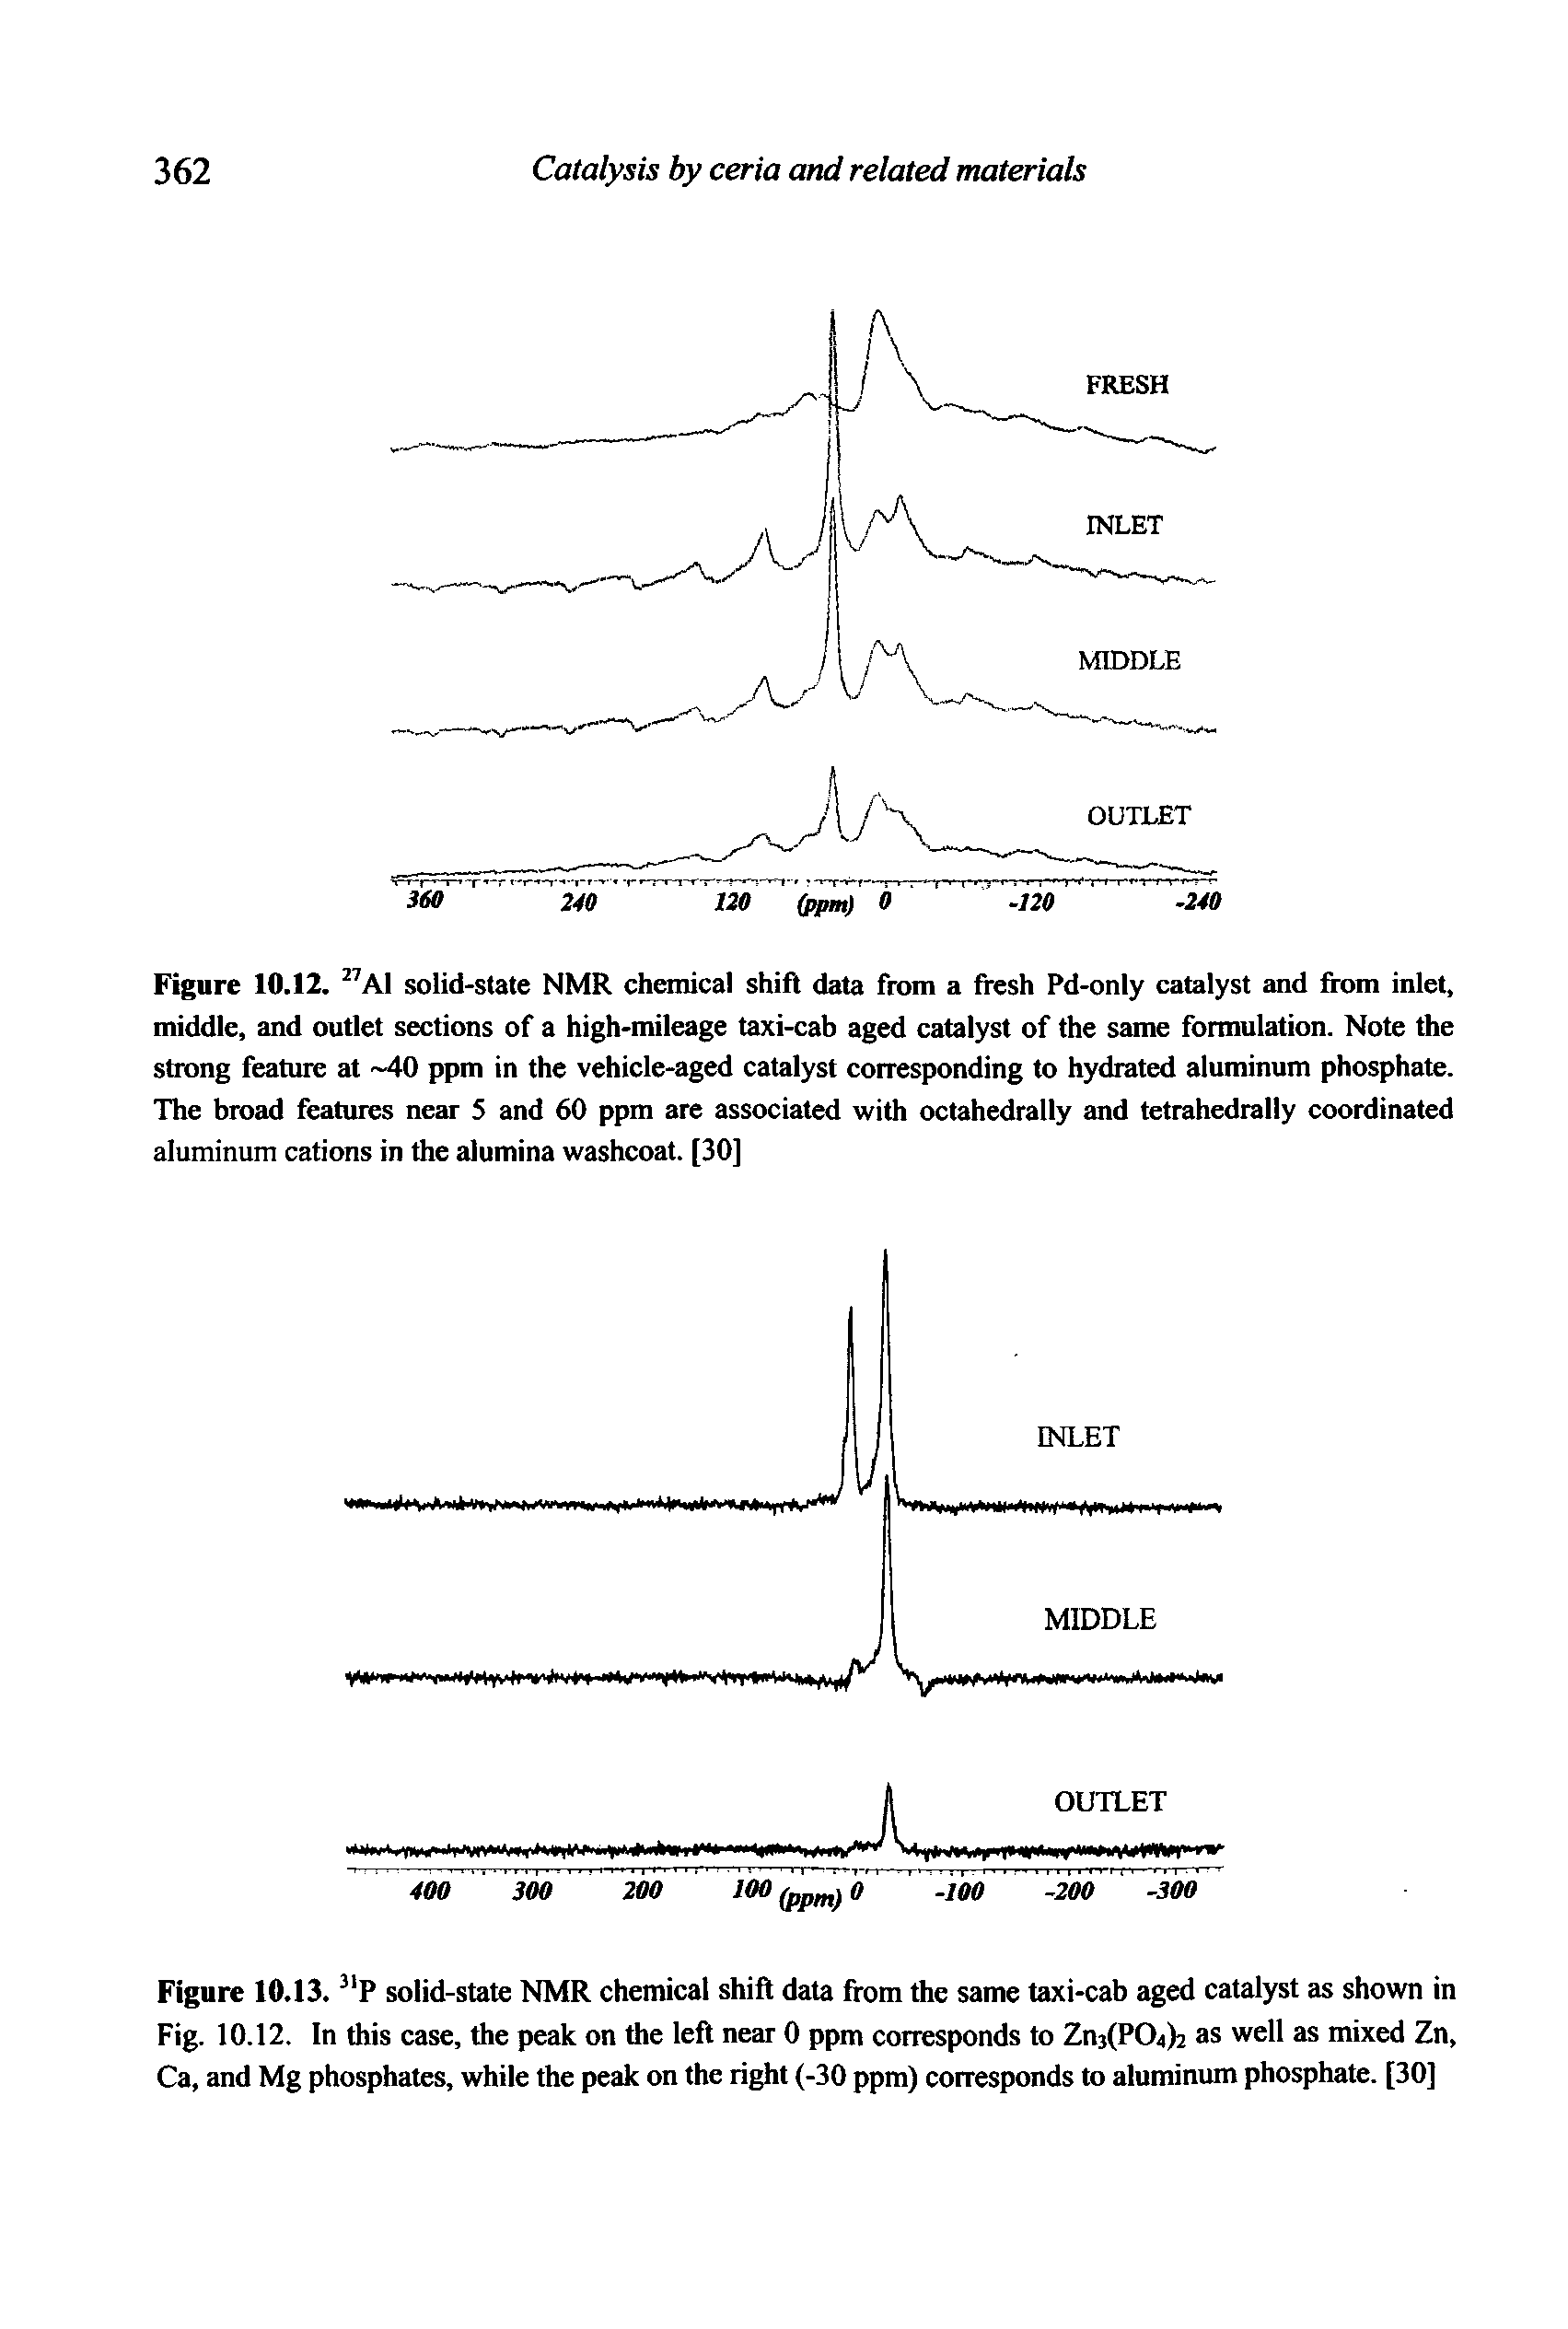 Figure 10.12. AI solid-state NMR chemical shift data from a fresh Pd-only catalyst and from inlet, middle, and outlet sections of a high-mileage taxi-cab aged catalyst of the same formulation. Note the strong feature at 40 ppm in the vehicle-aged catalyst corresponding to hydrated aluminum phosphate. The broad features near 5 and 60 ppm are associated with octahedrally and tetrahedrally coordinated aluminum cations in the alumina washcoat. [30]...